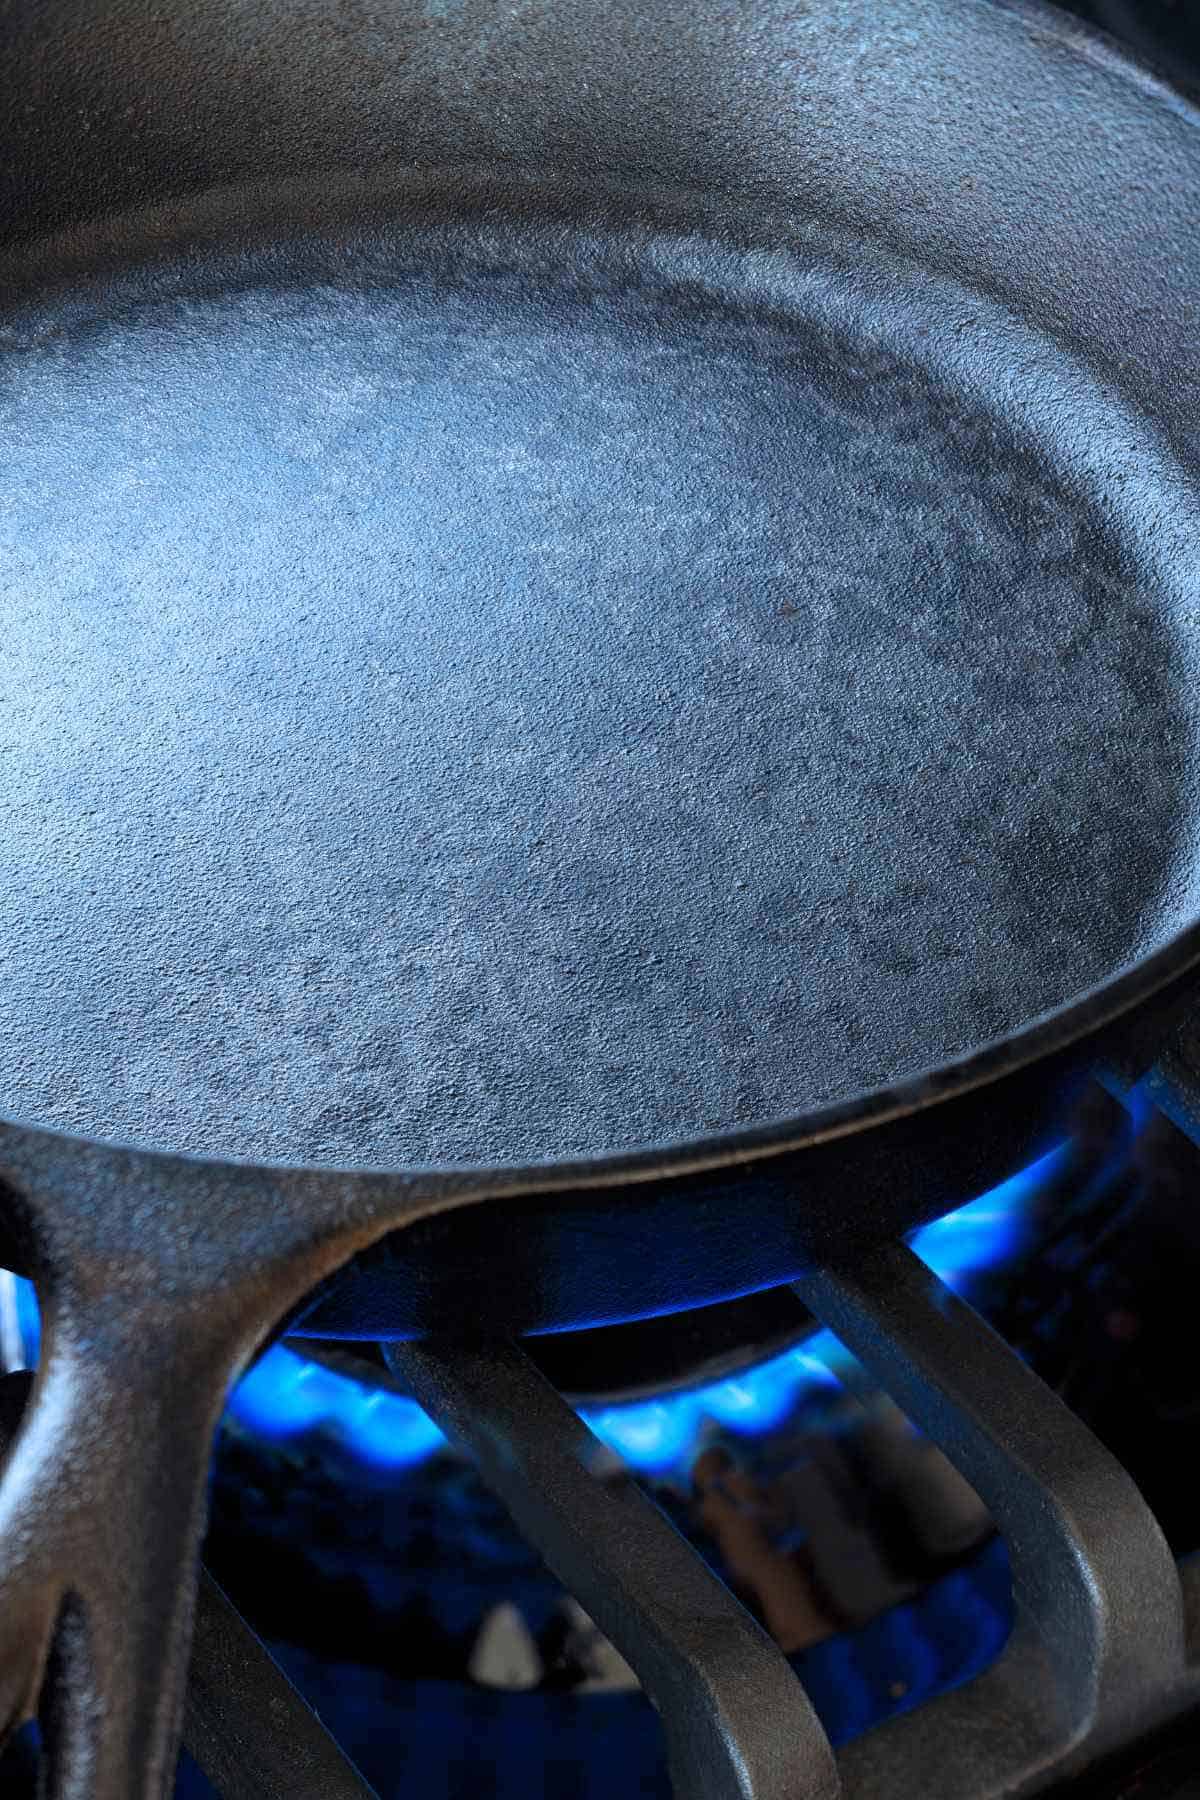 Heating a cast iron skillet over a low flame on a gas stove.